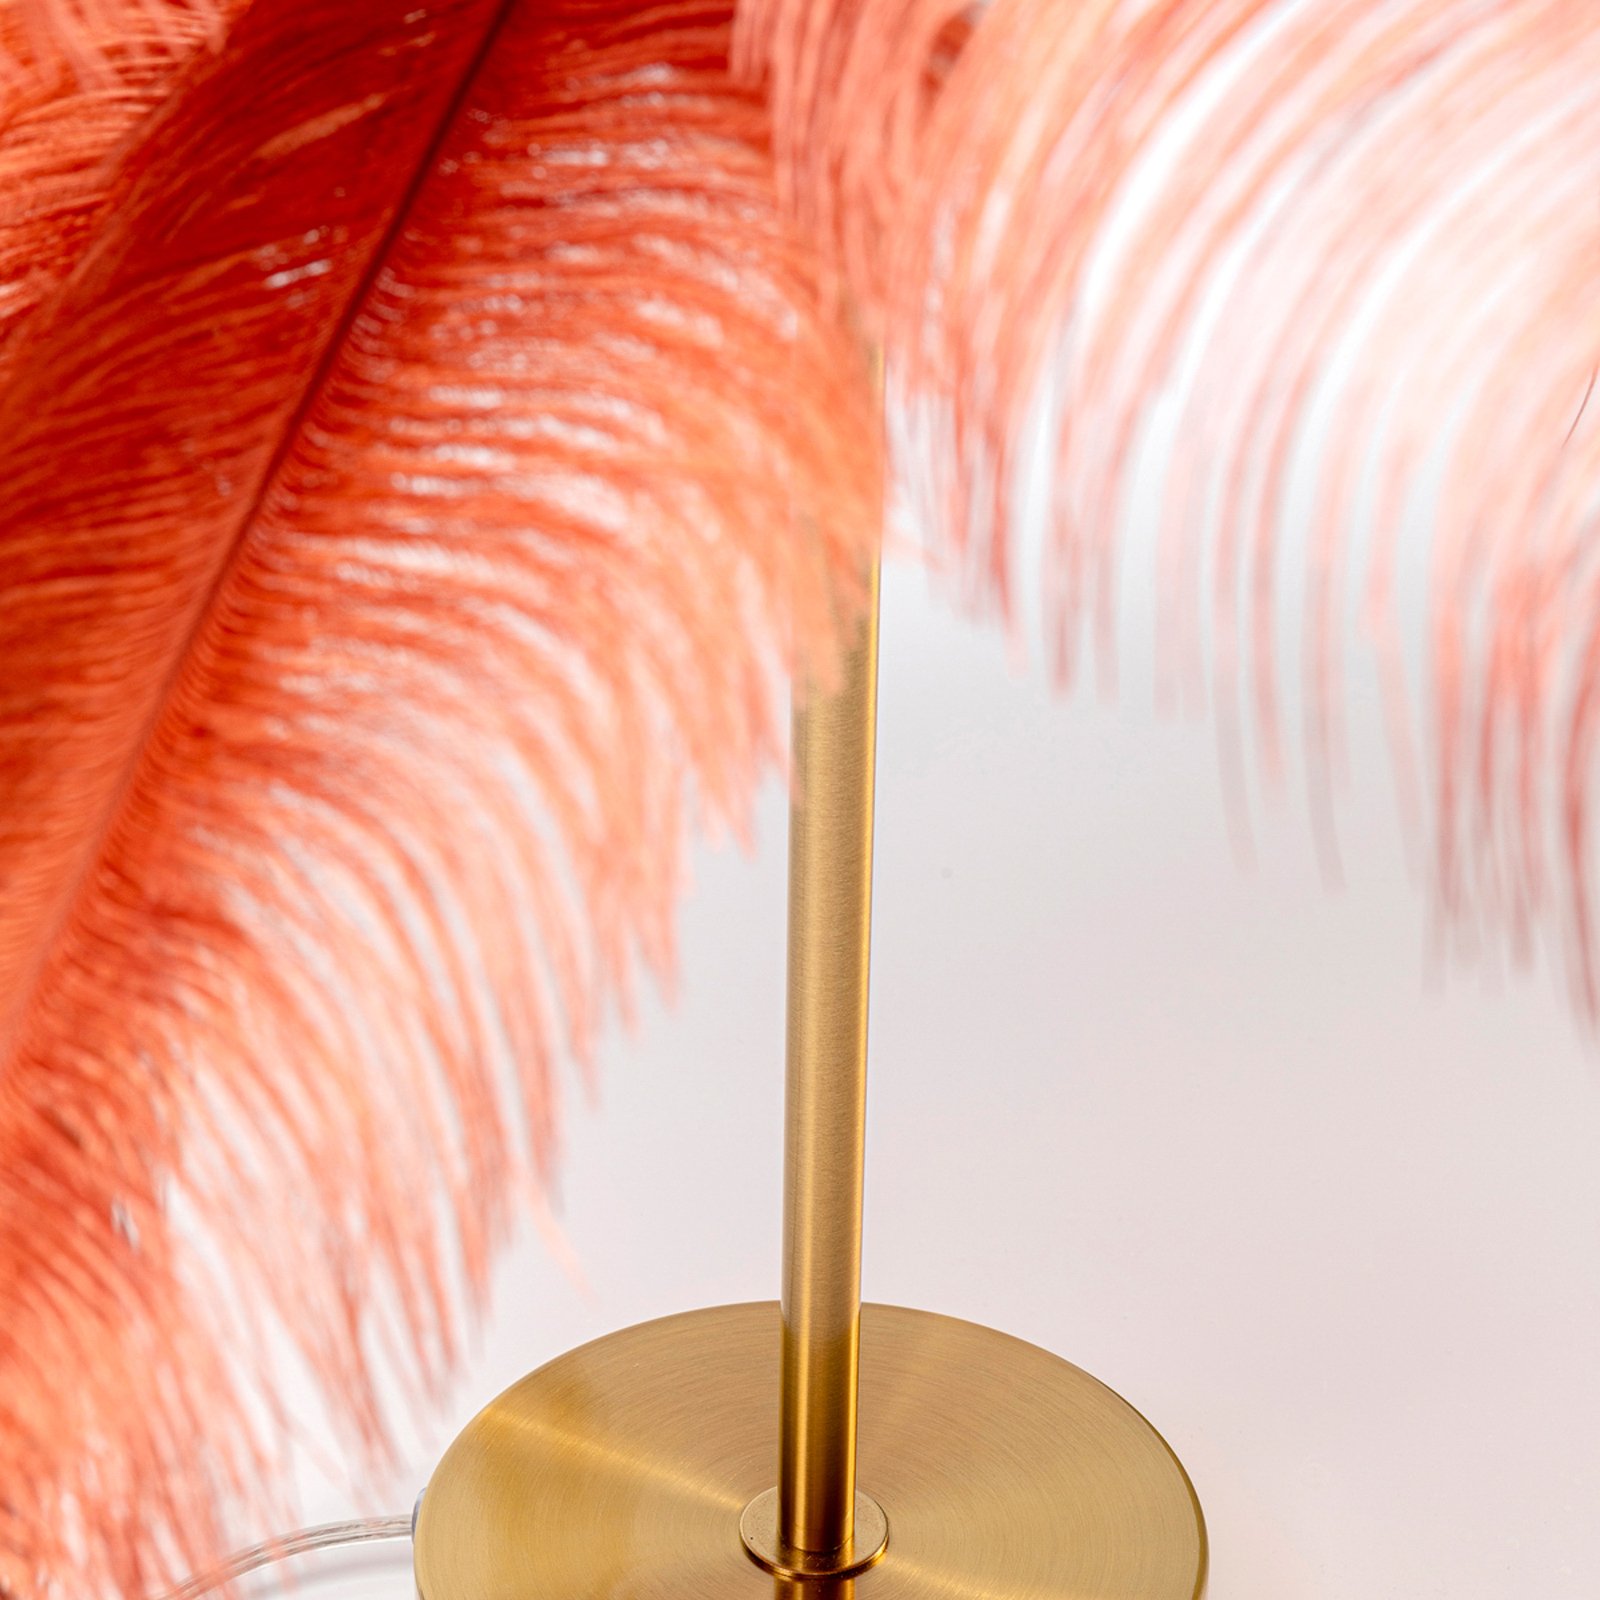 KARE Feather Palm table lamp feathers, rust red